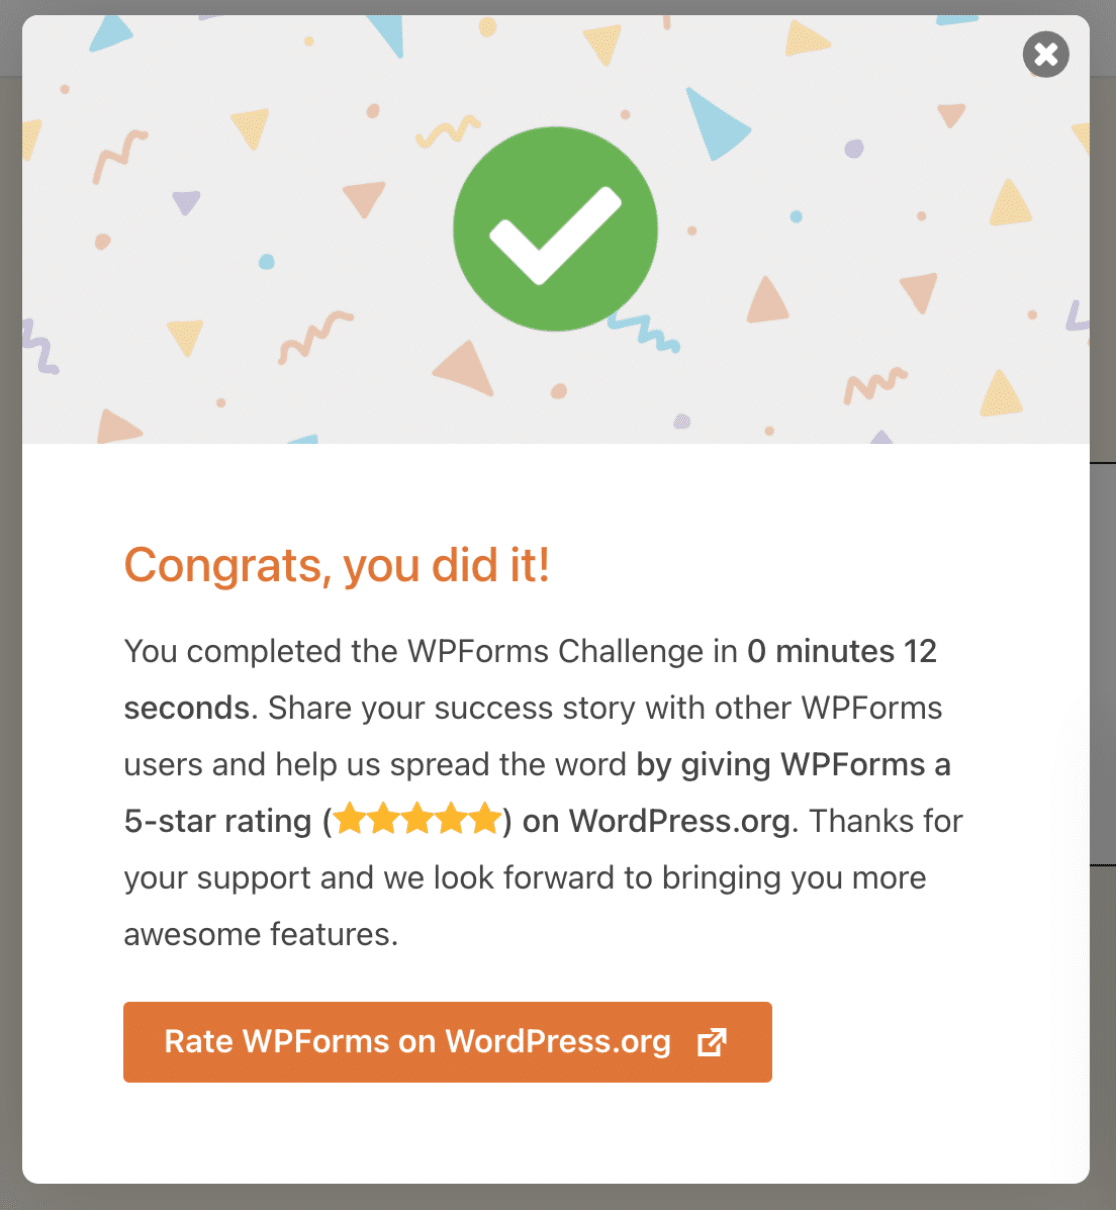 The success message for completing the WPForms Challenge